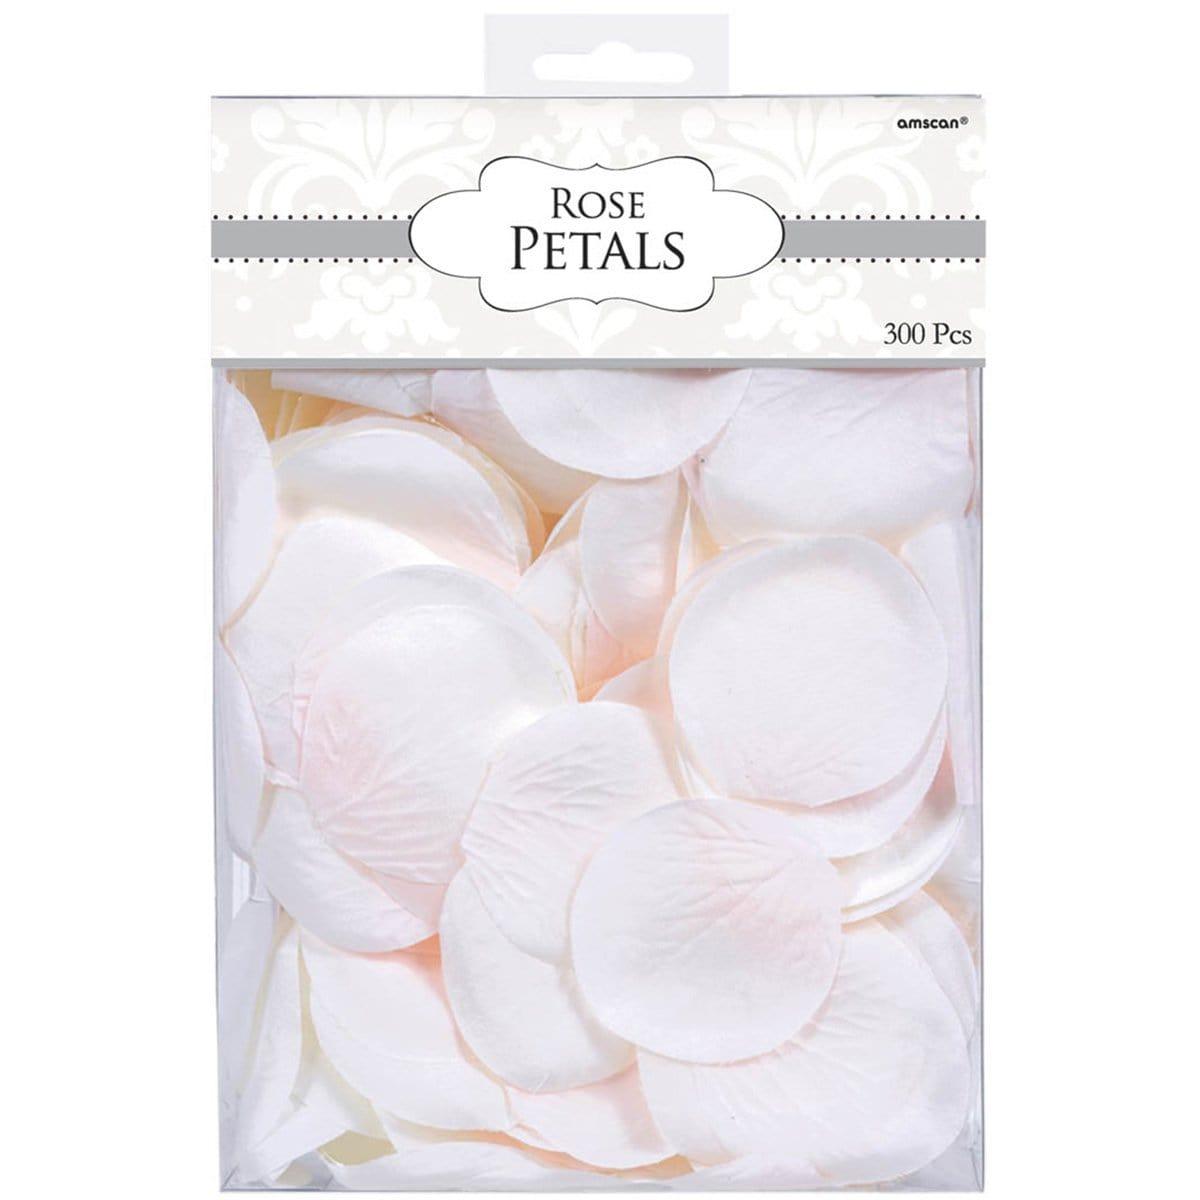 Buy Wedding Rose Petals - White 300/pkg. sold at Party Expert